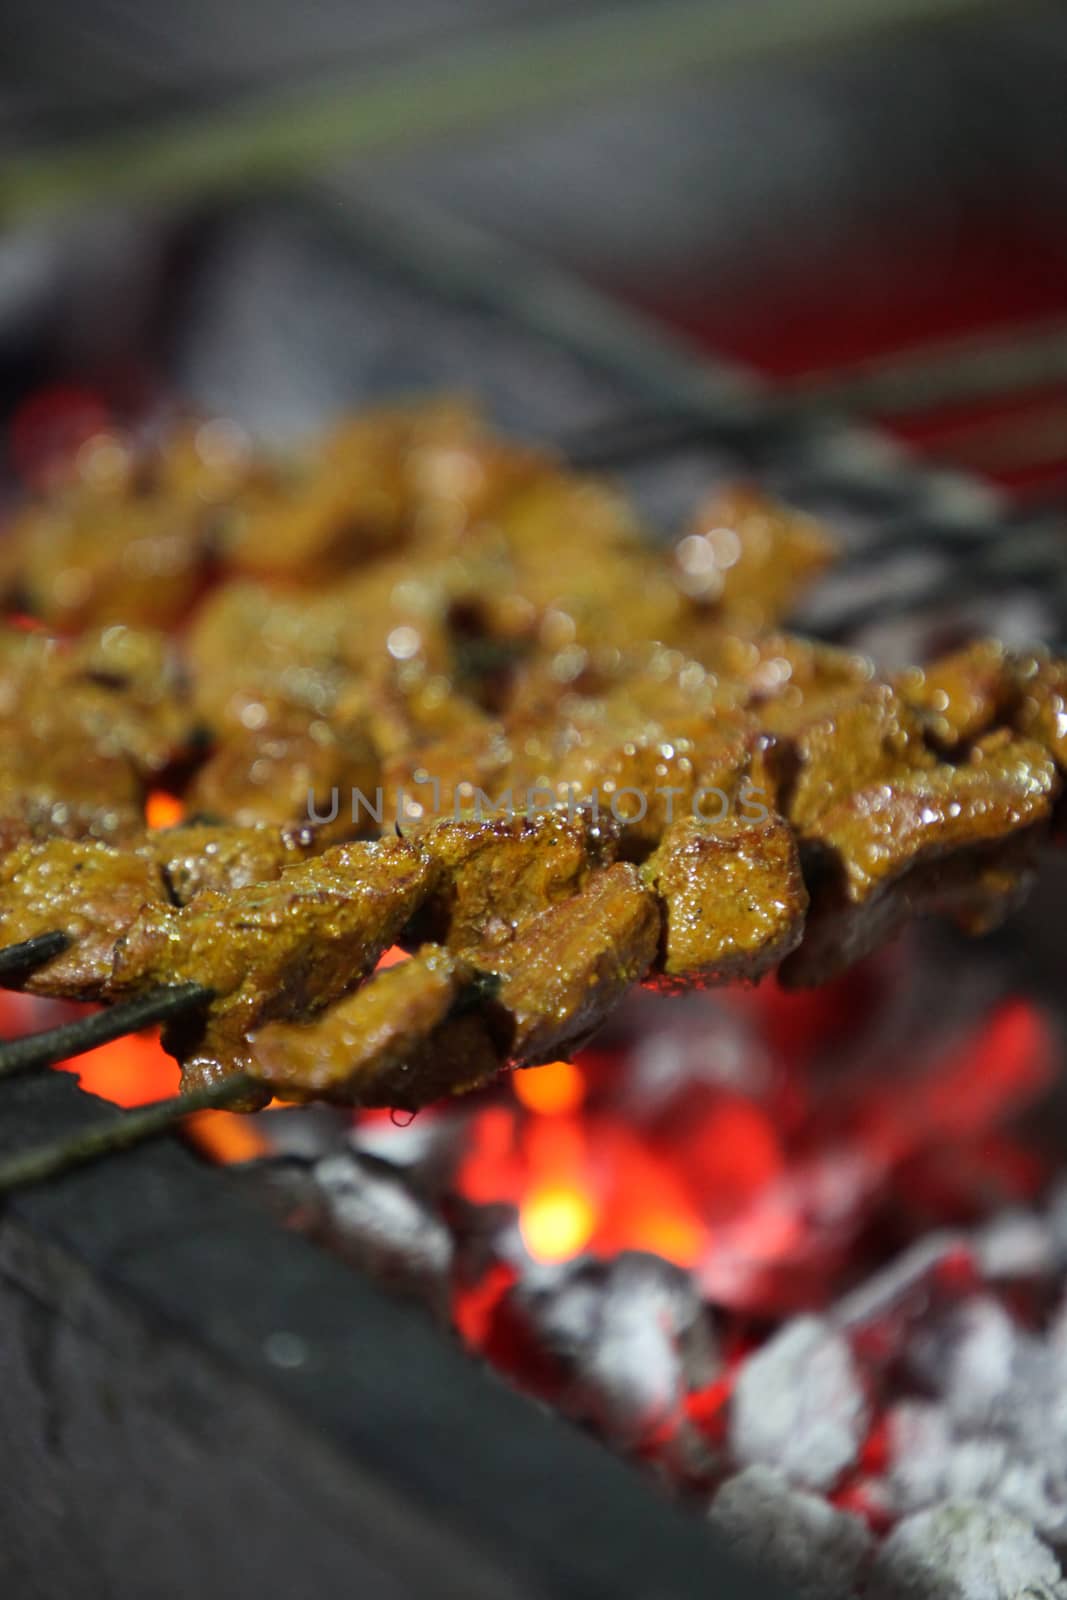 Delicious looking juicy mutton kebabs cooking on a a barbecue 